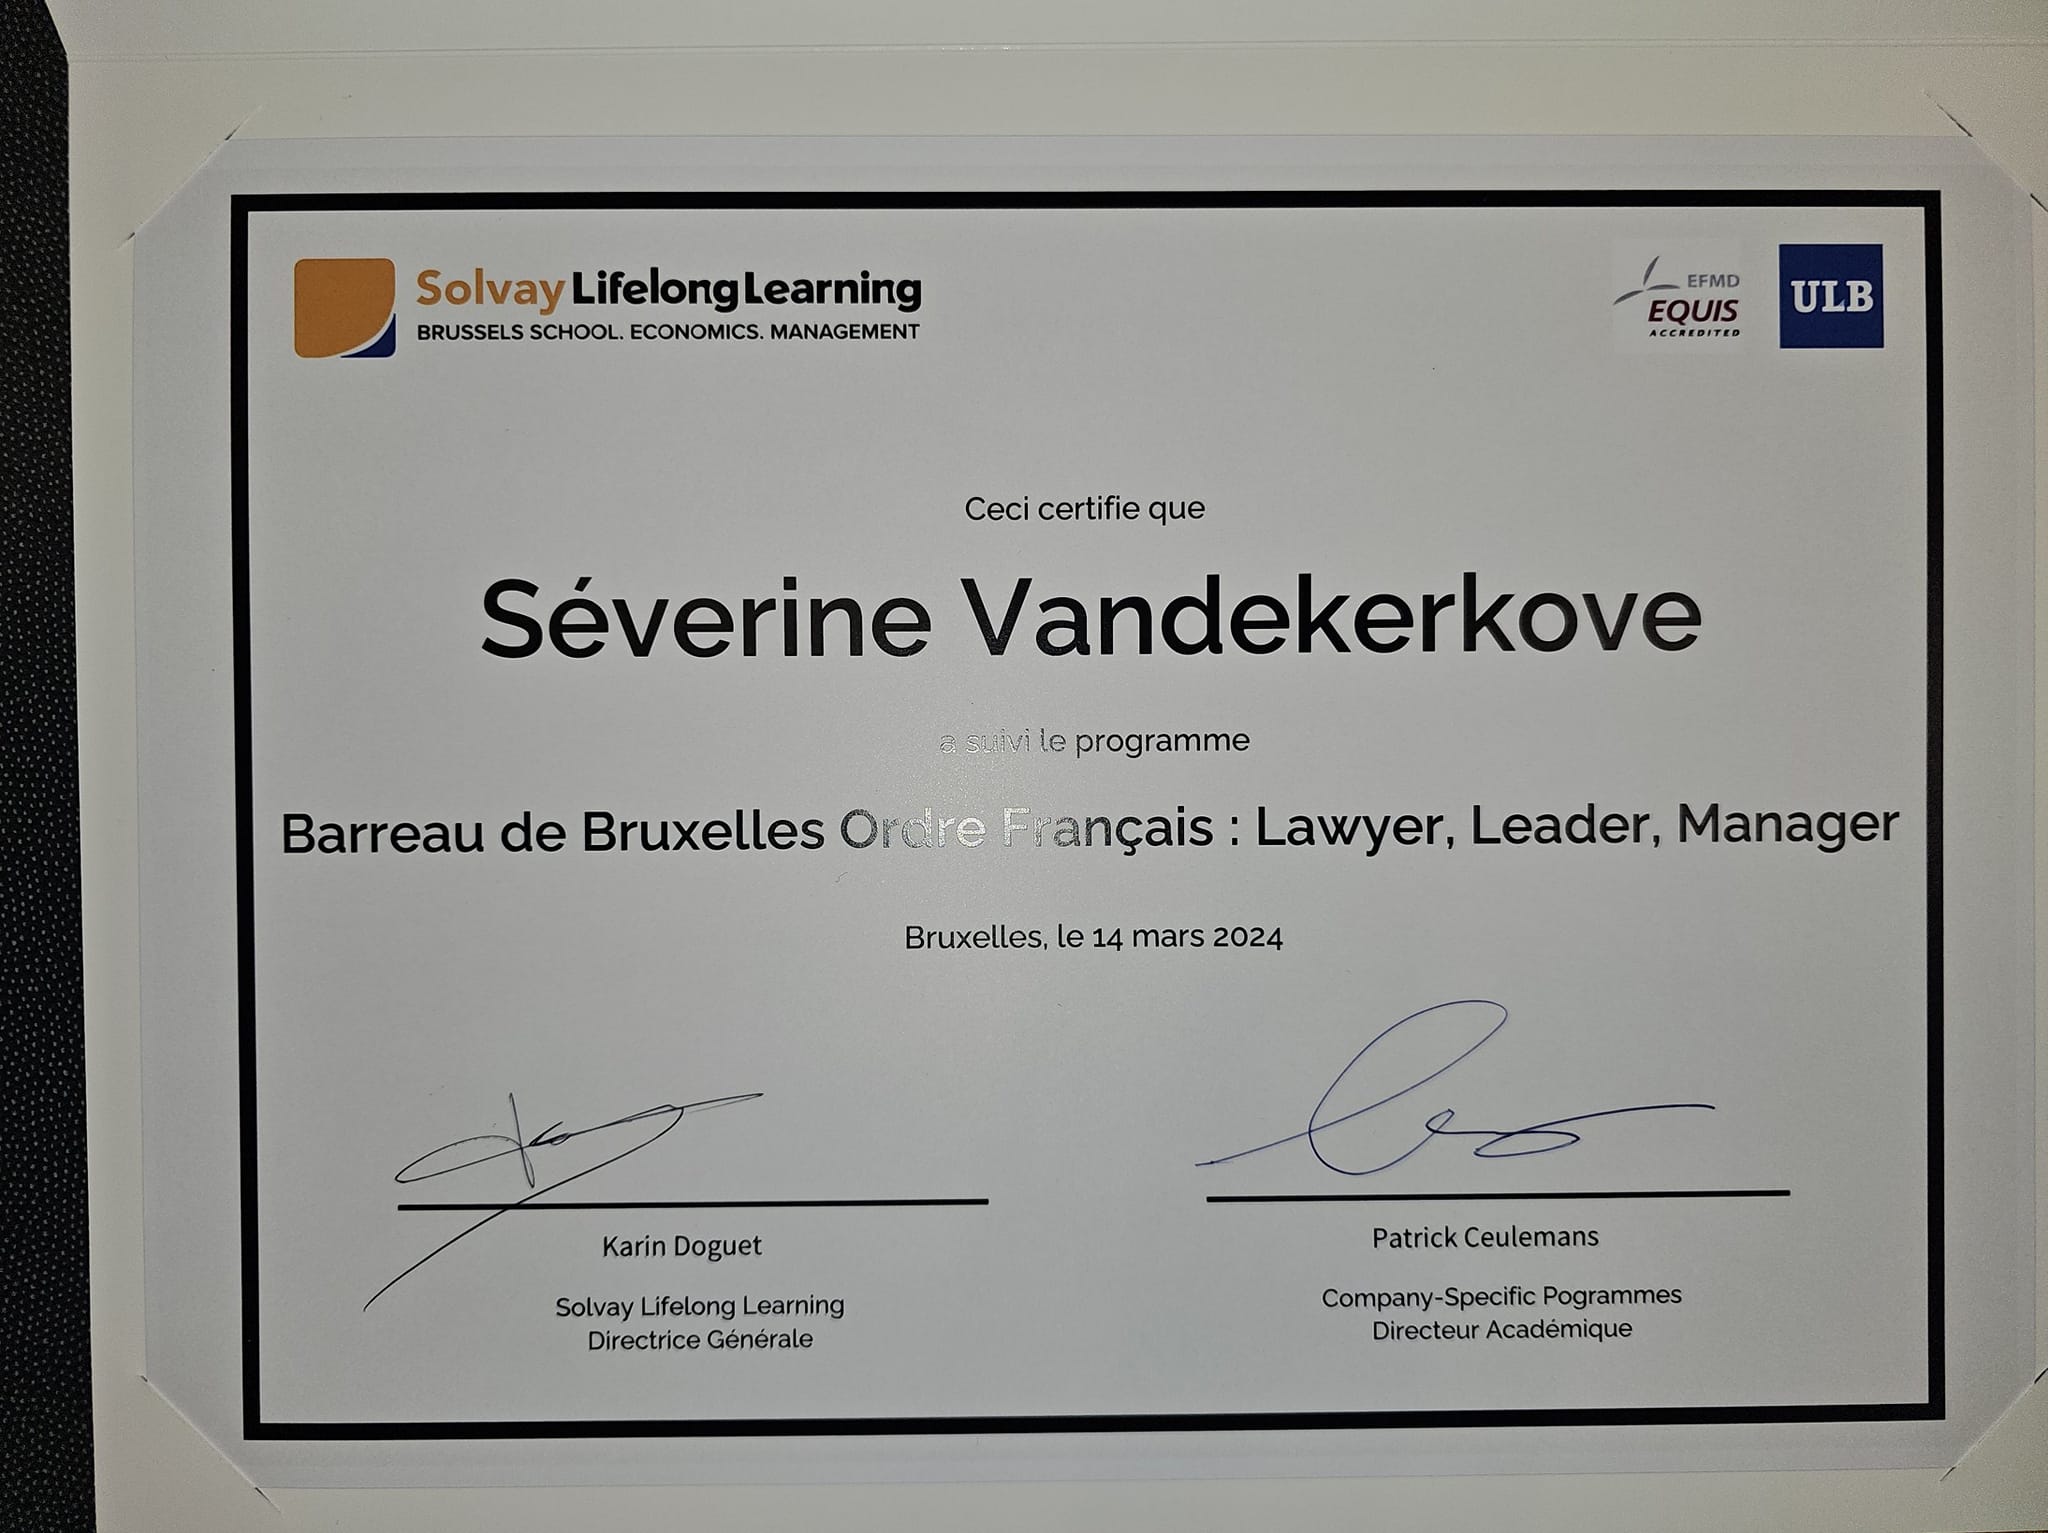 Developing Legal and Managerial Skills: My Journey at the “Lawyer, Leader, Manager” Training at Solvay